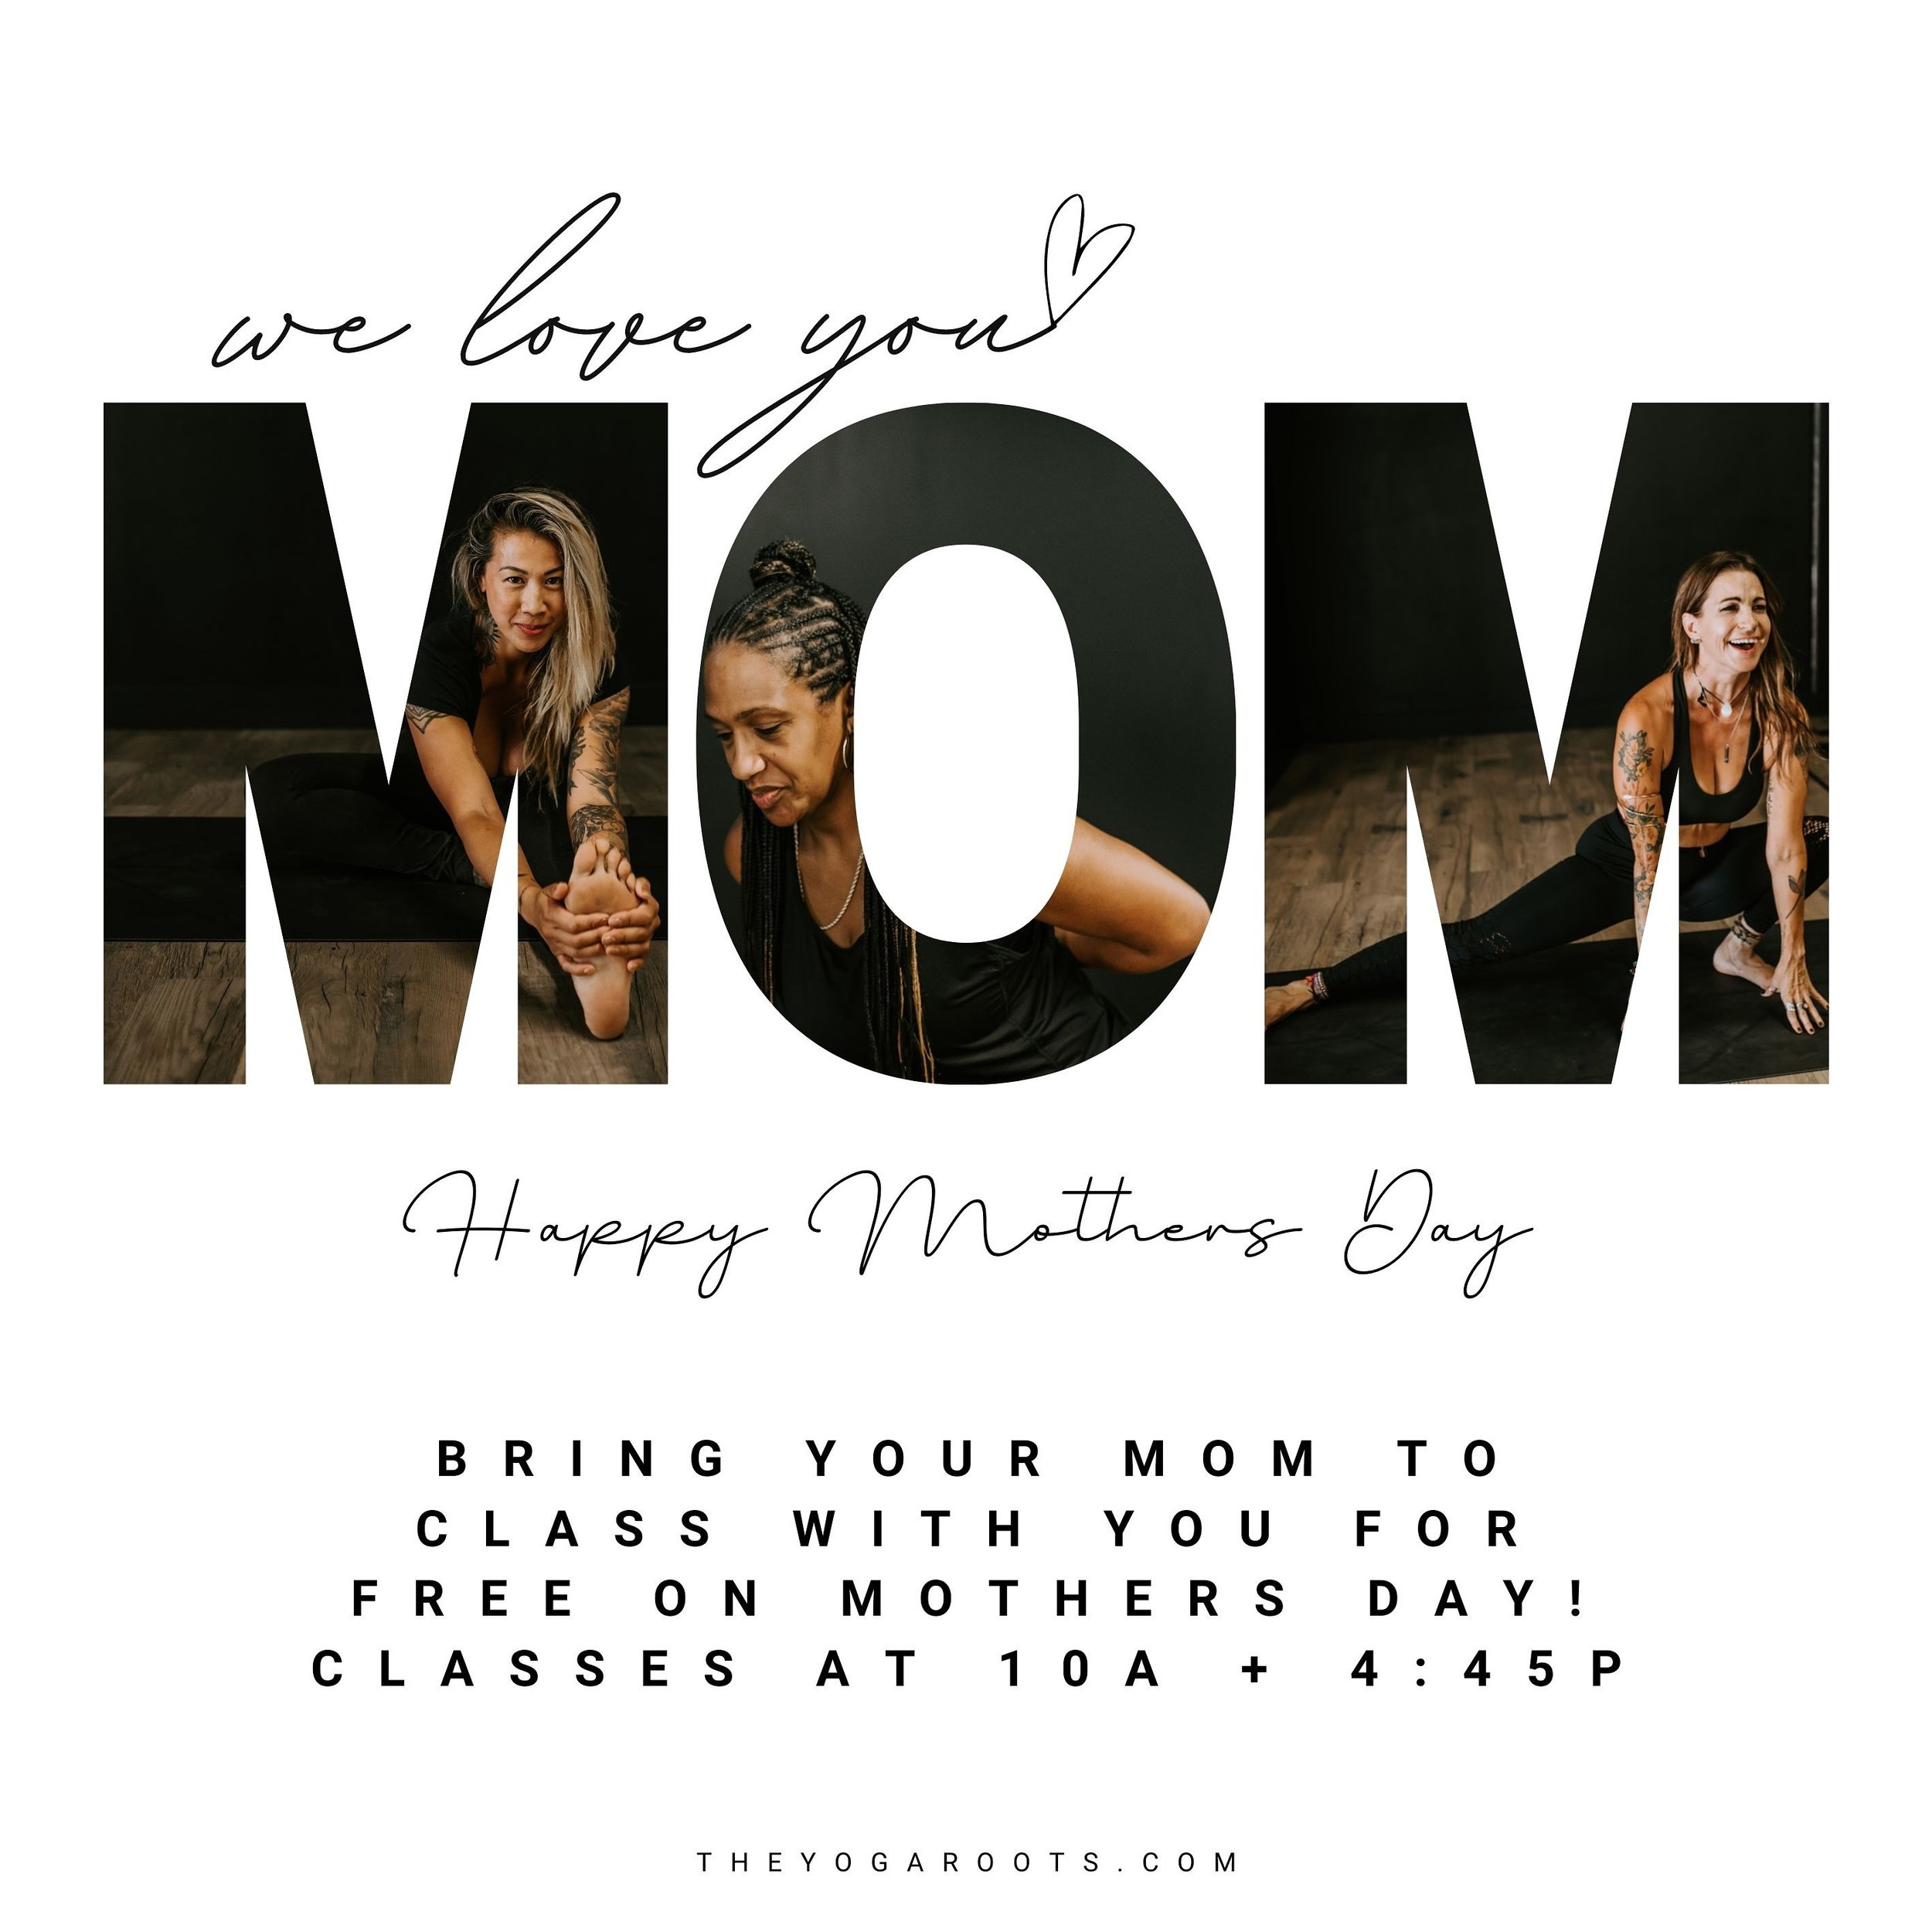 Bring your mama with you to class for FREE on Mother&rsquo;s Day! Classes at 10 + 4:45. Just show up 10m early and we gotchu! 🖤